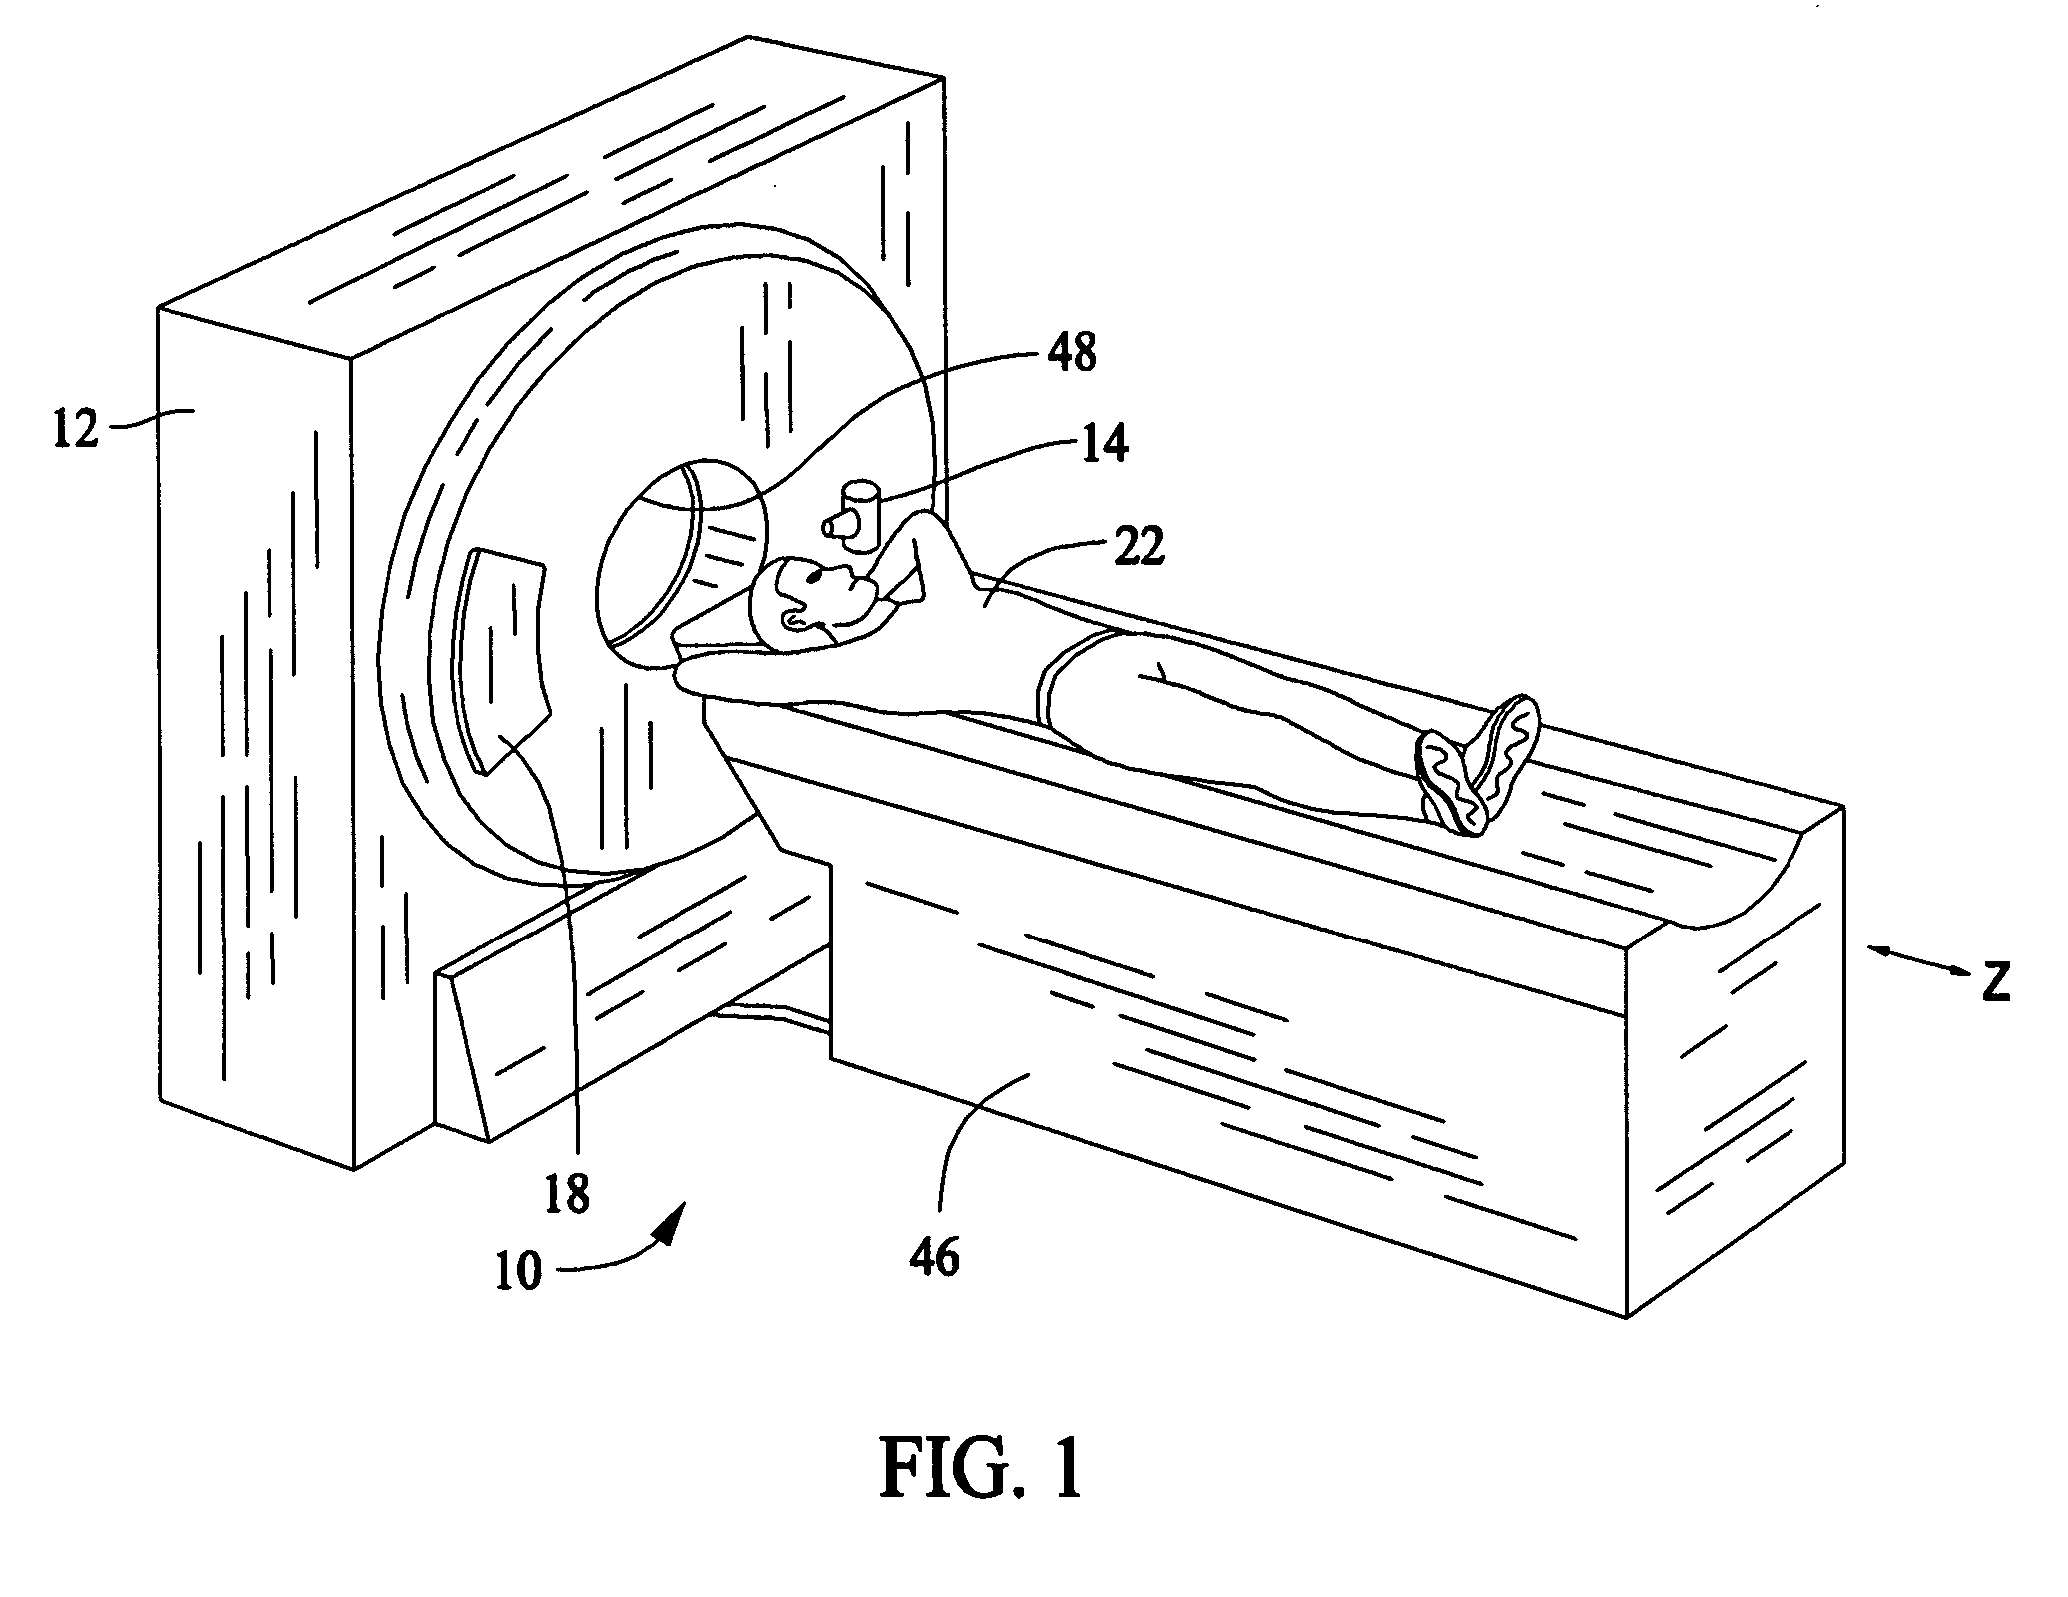 Method and system for displaying medical images